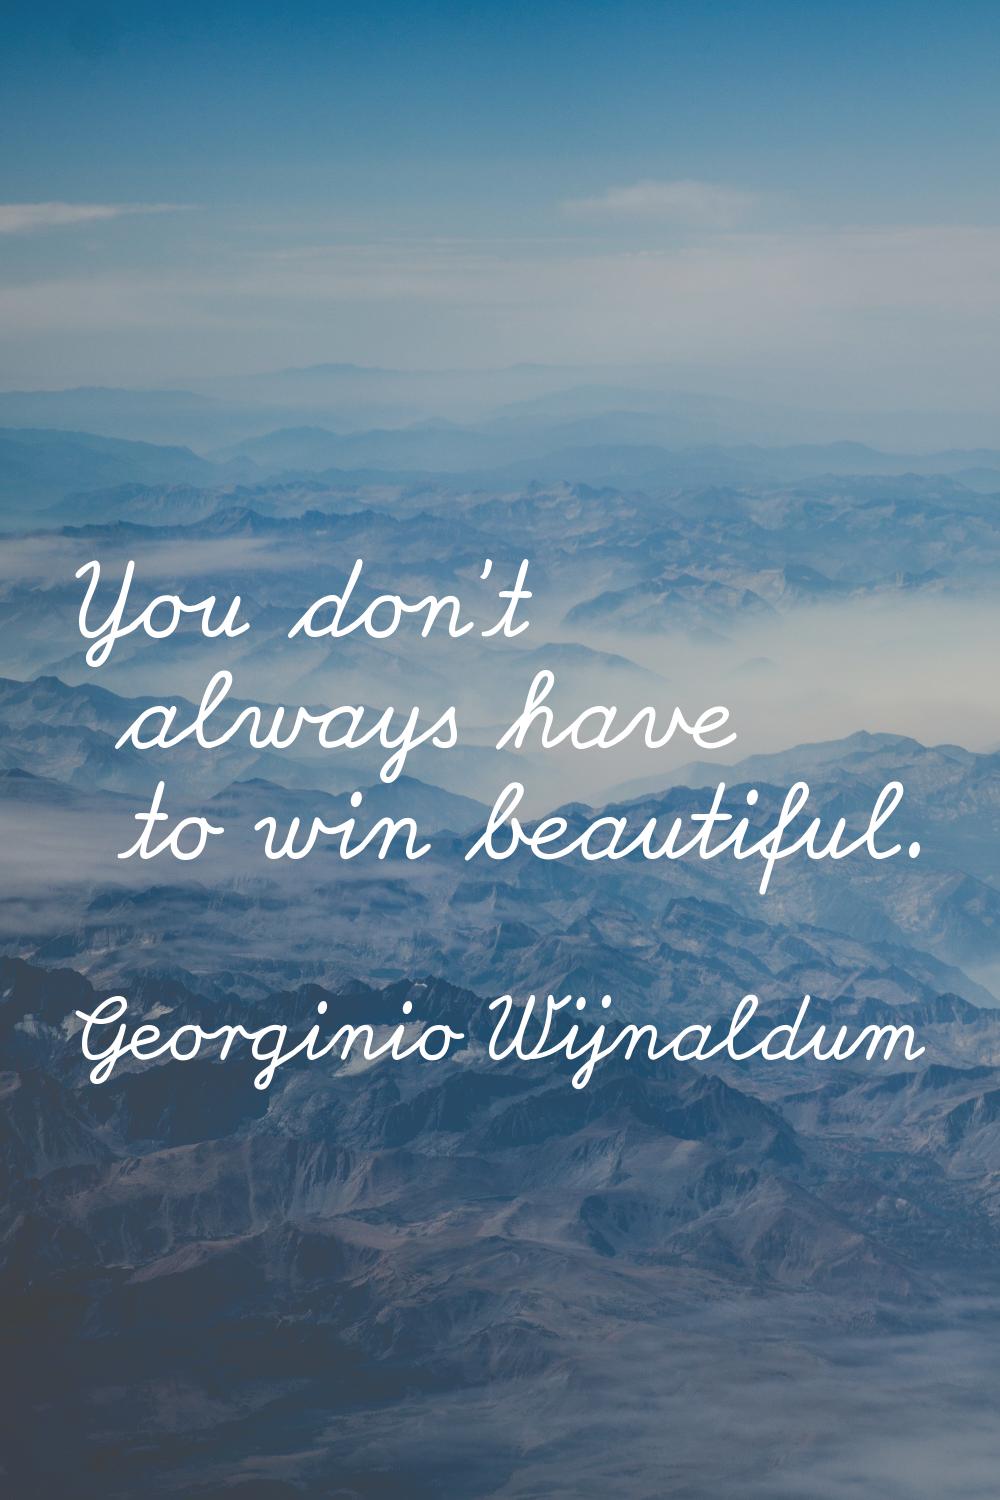 You don't always have to win beautiful.